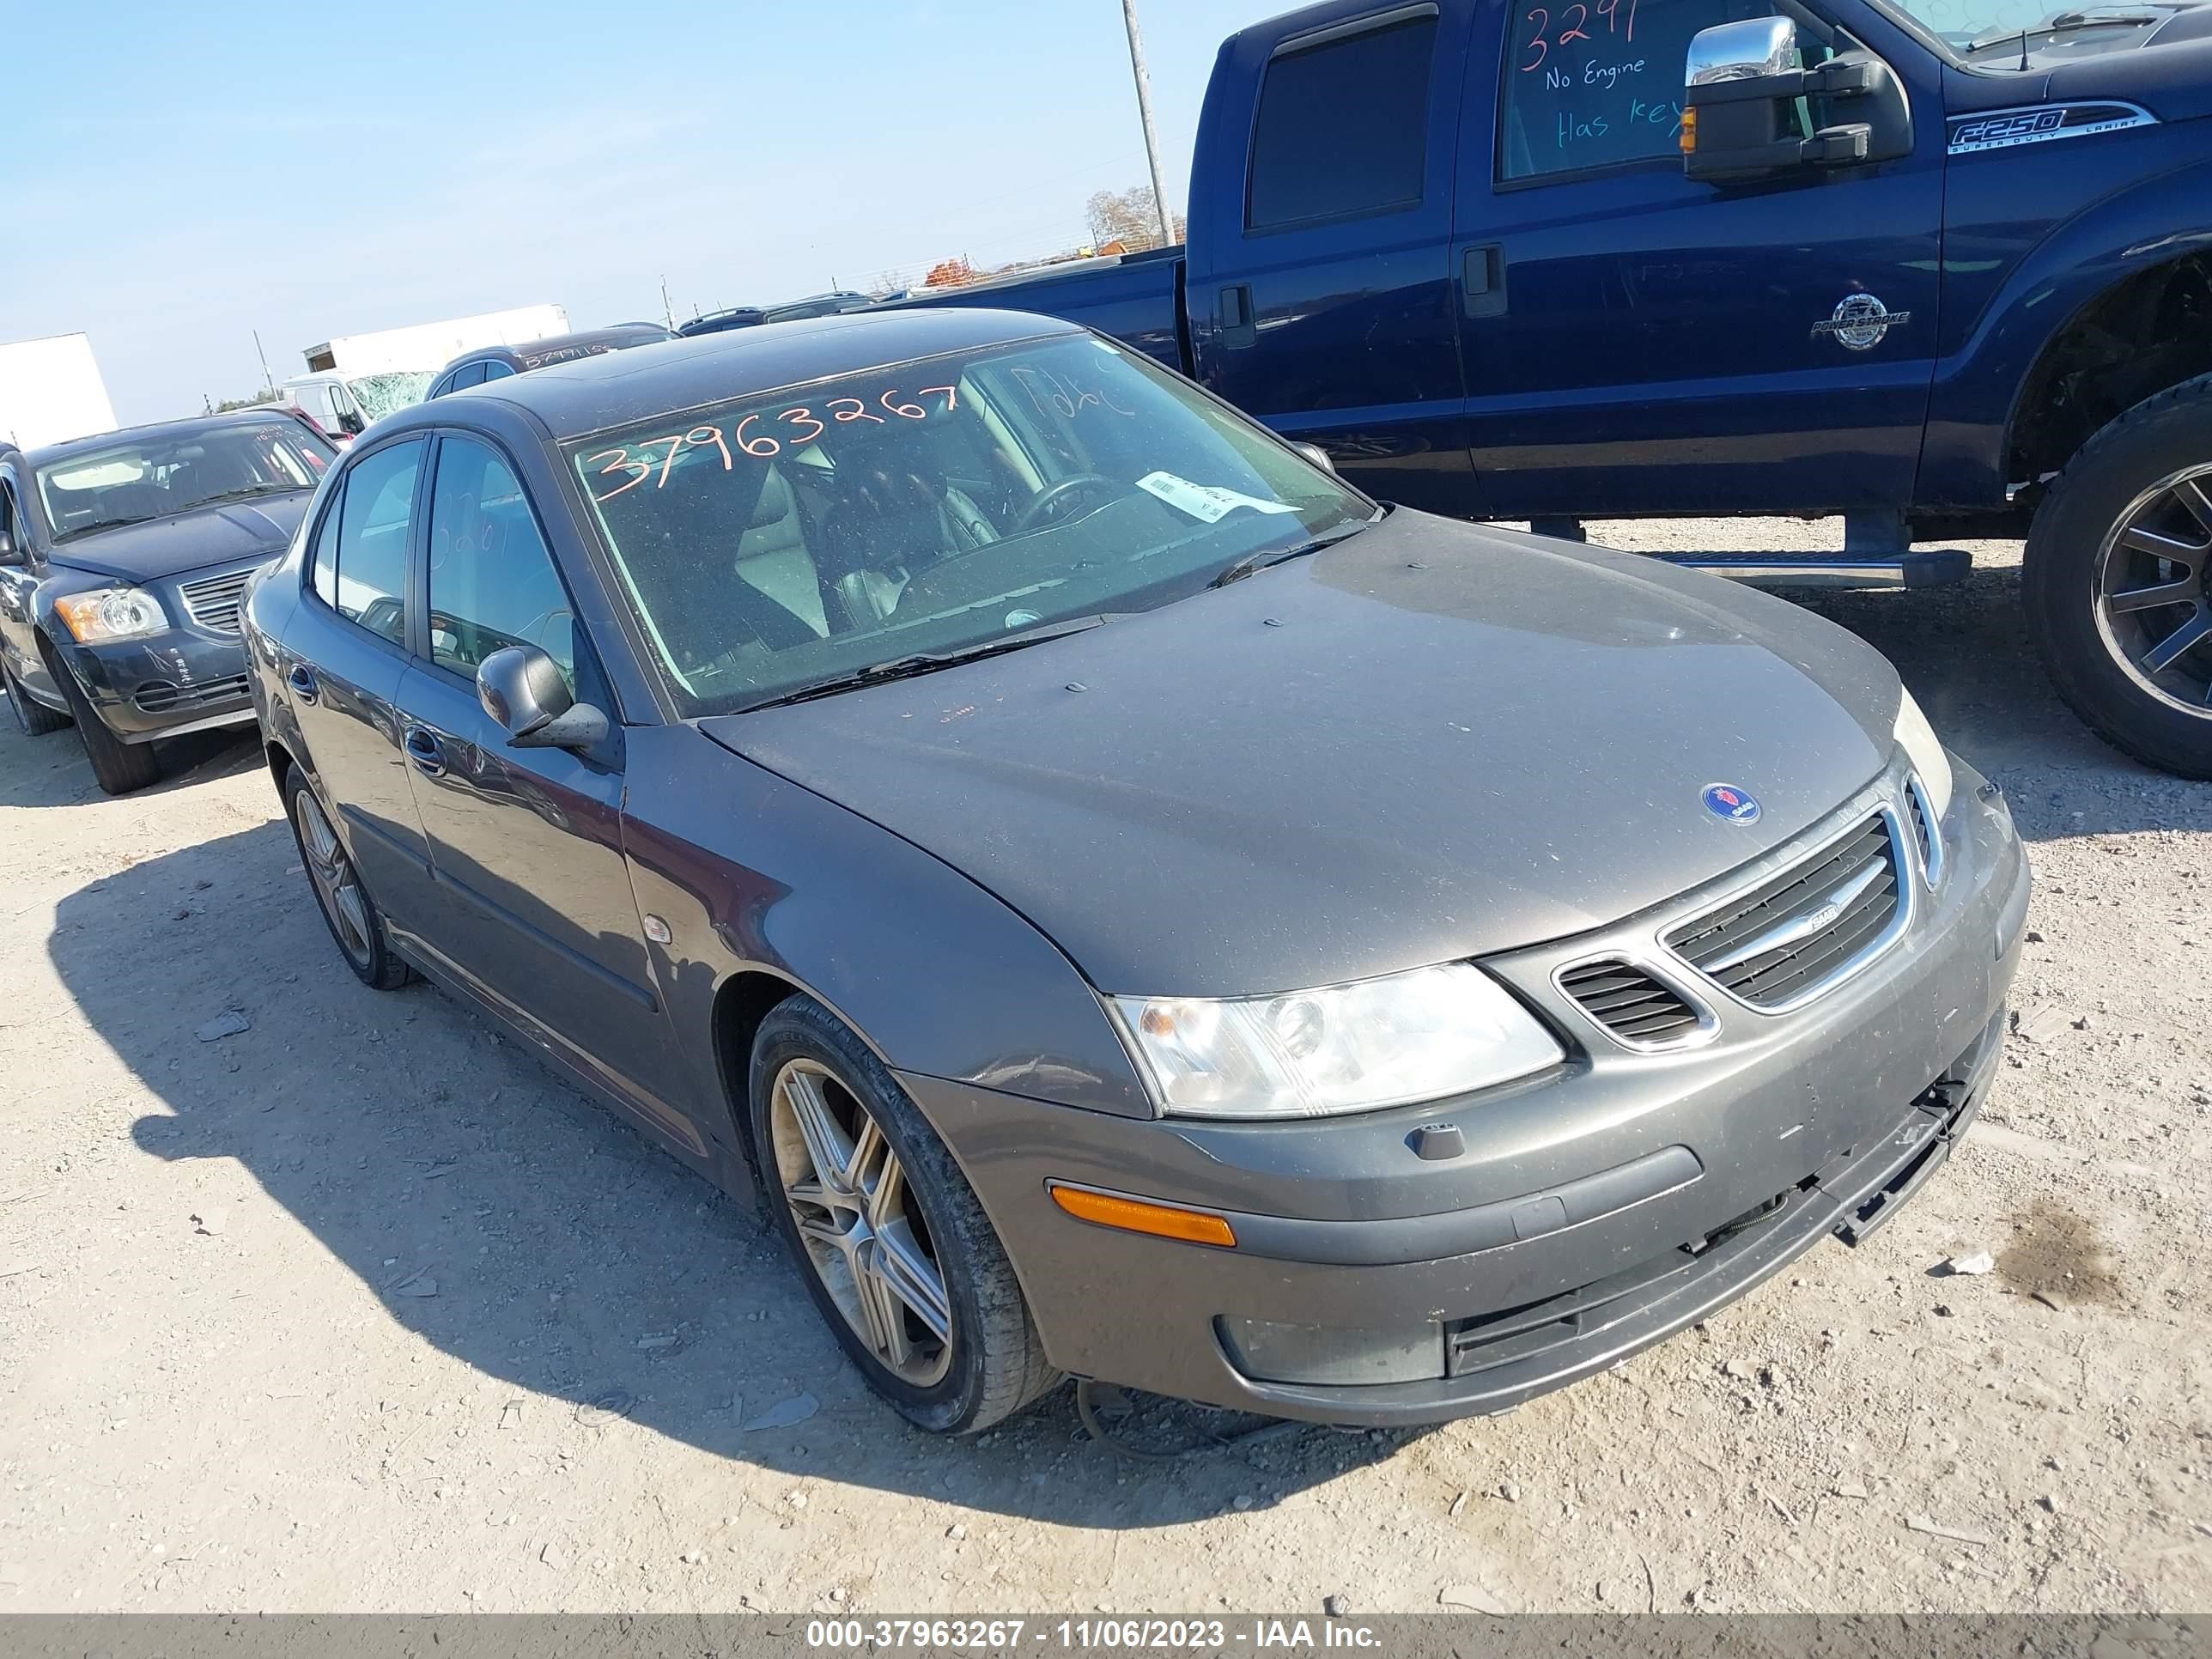 vin: YS3FD49Y171142031 YS3FD49Y171142031 2007 saab 9-3 2000 for Sale in 17372, 10 Auction Drive, Latimore Township, Pennsylvania, USA